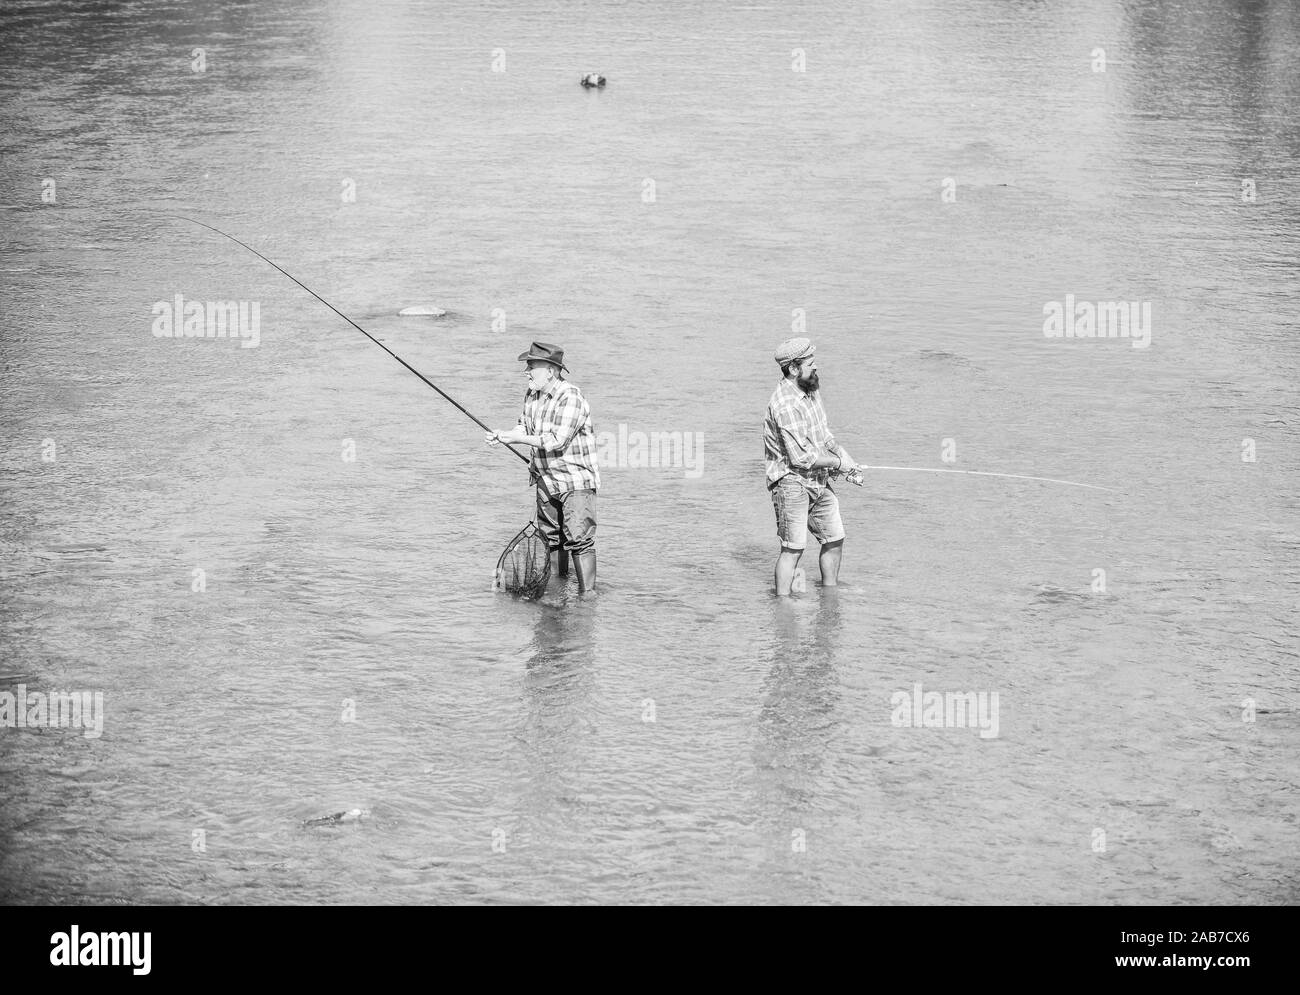 https://c8.alamy.com/comp/2AB7CX6/hobby-and-sport-activity-fishing-together-men-stand-in-water-fishing-is-much-more-than-fish-male-friendship-father-and-son-fishing-summer-weekend-happy-fisherman-with-fishing-rod-and-net-2AB7CX6.jpg